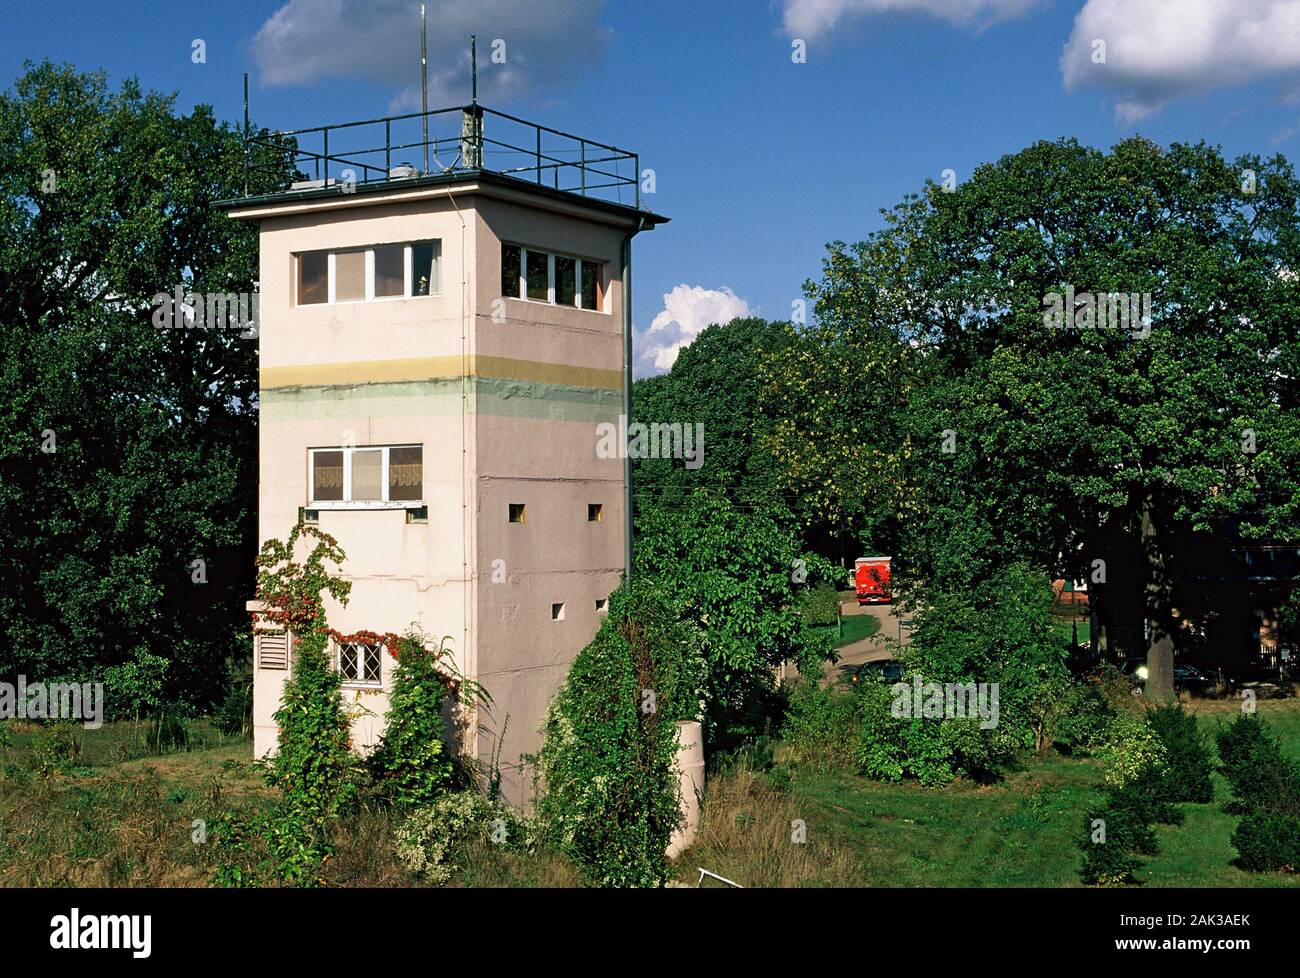 A watchtower in Rüterberg reminds of the German Democratic Republic (GDR). Rüterberg is a district of Dömitz in the federal state of Mecklenburg-Weste Stock Photo